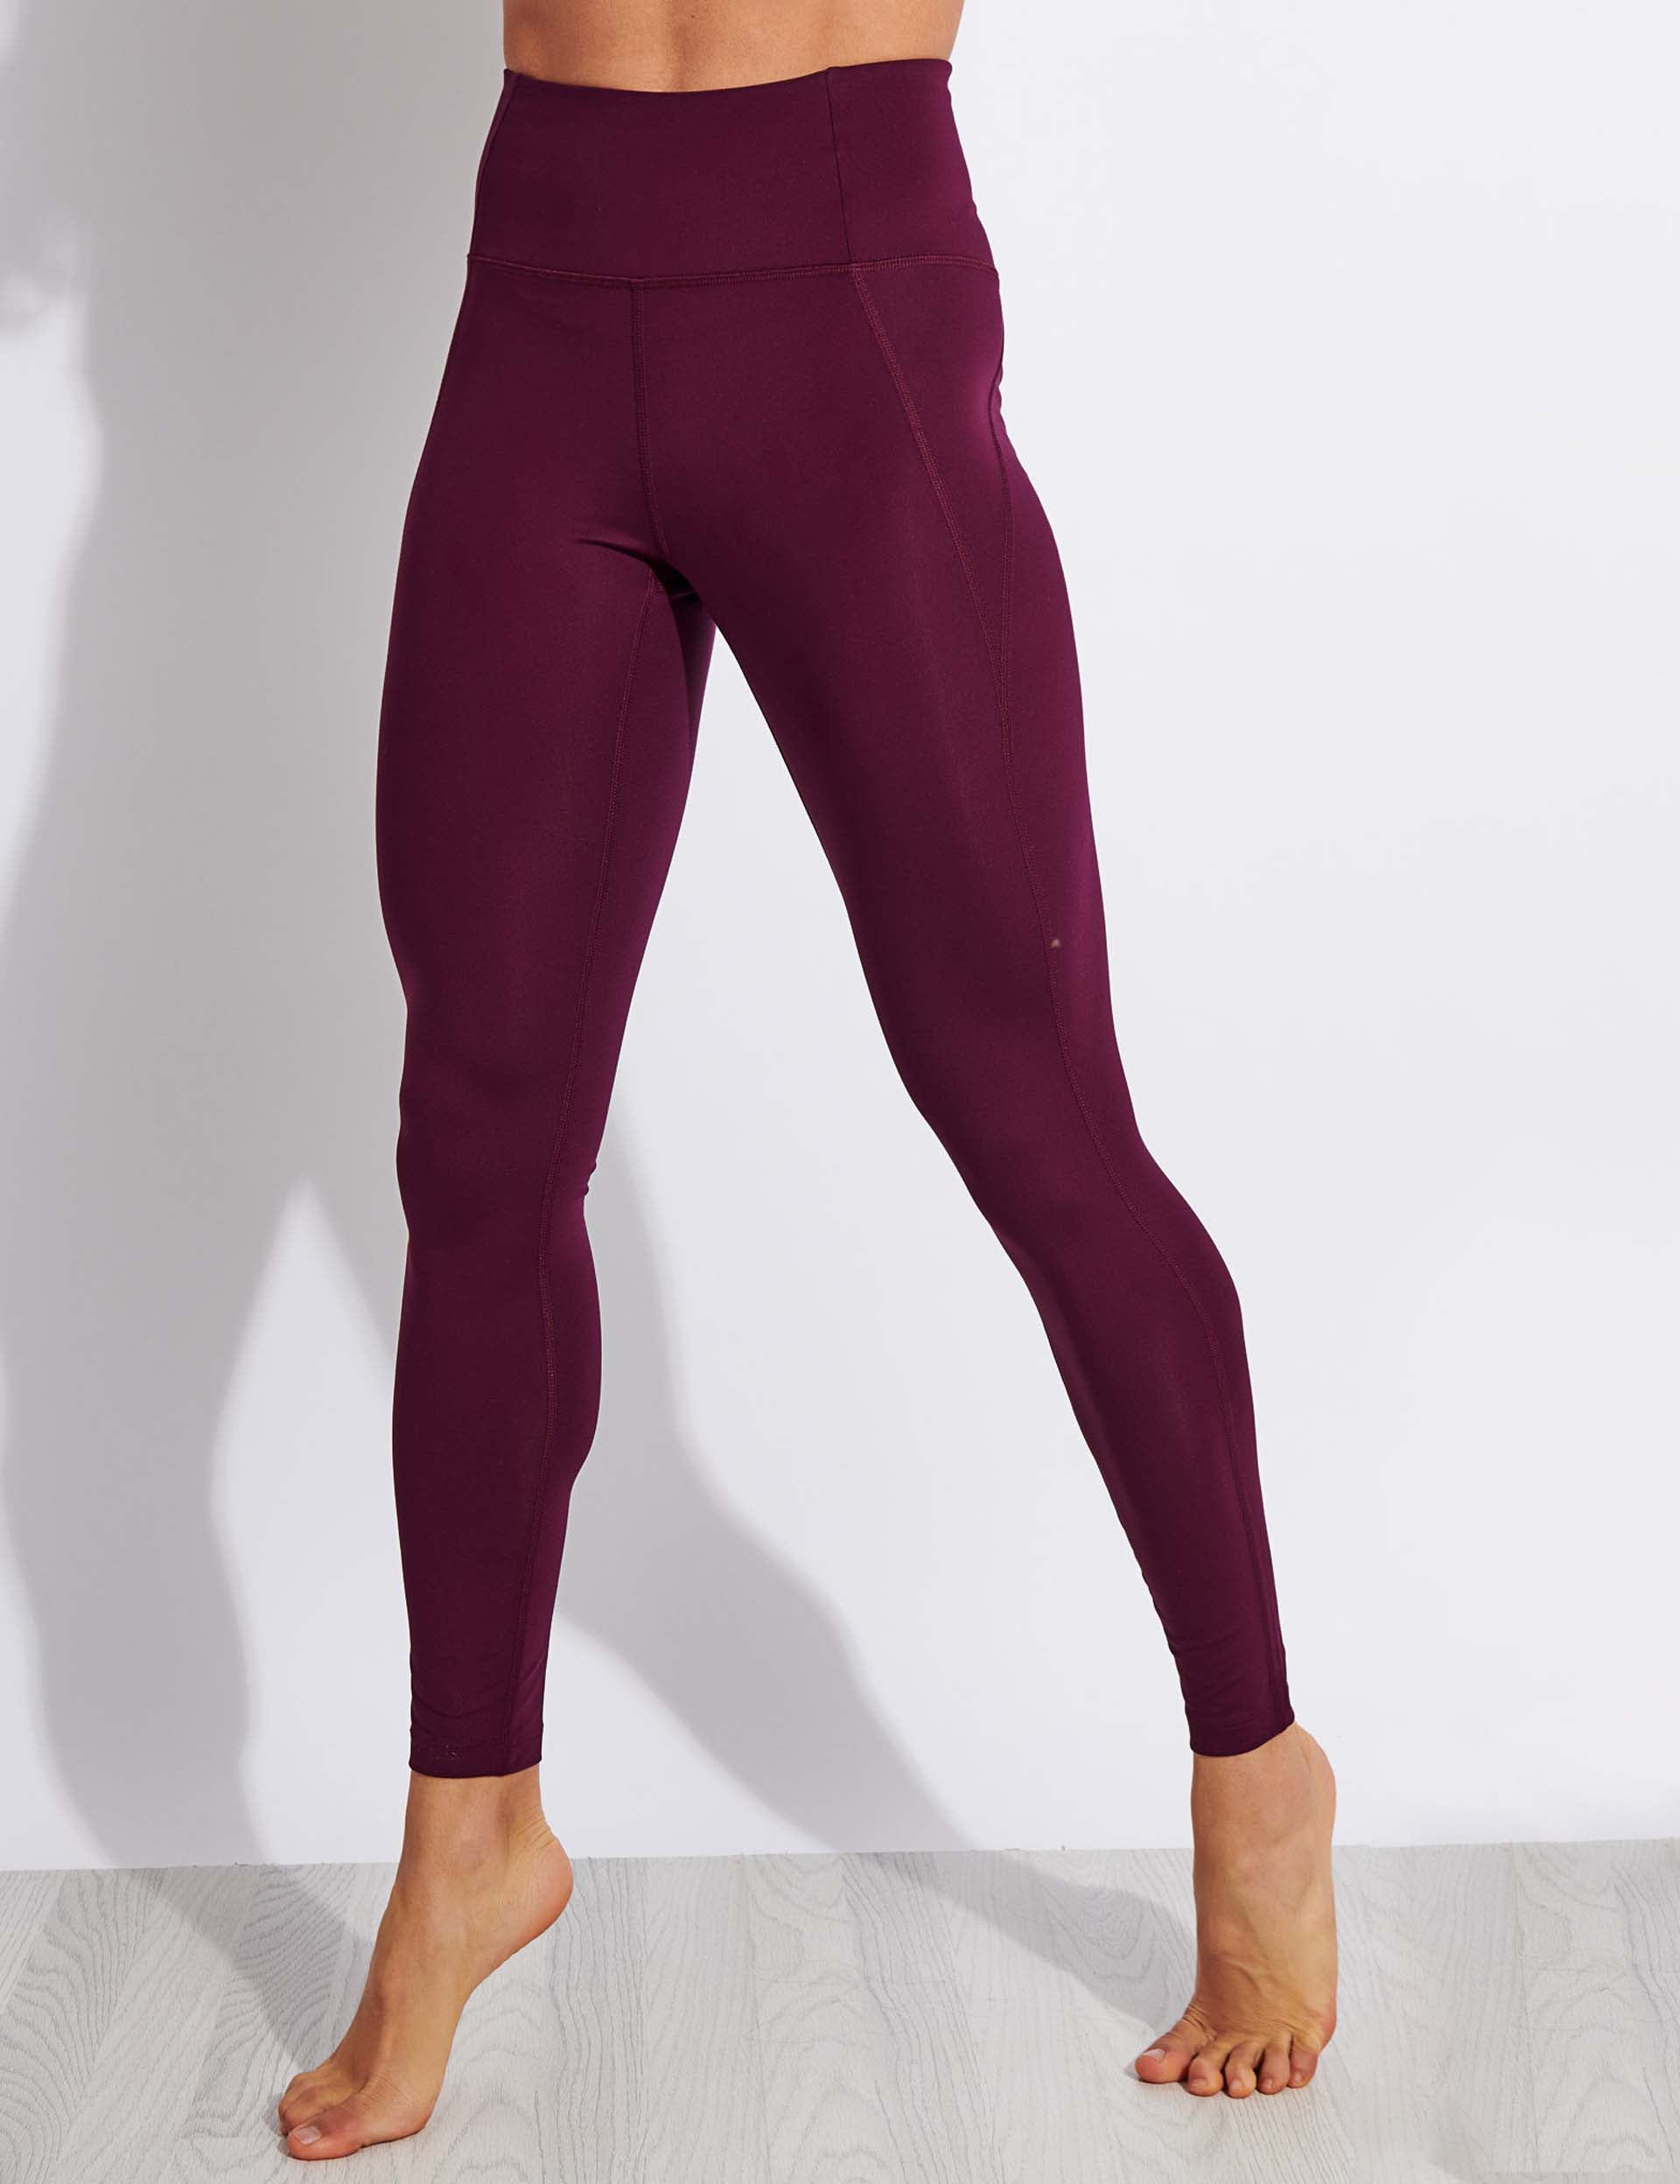 Girlfriend Collective  High Rise Compressive Legging (Full Length